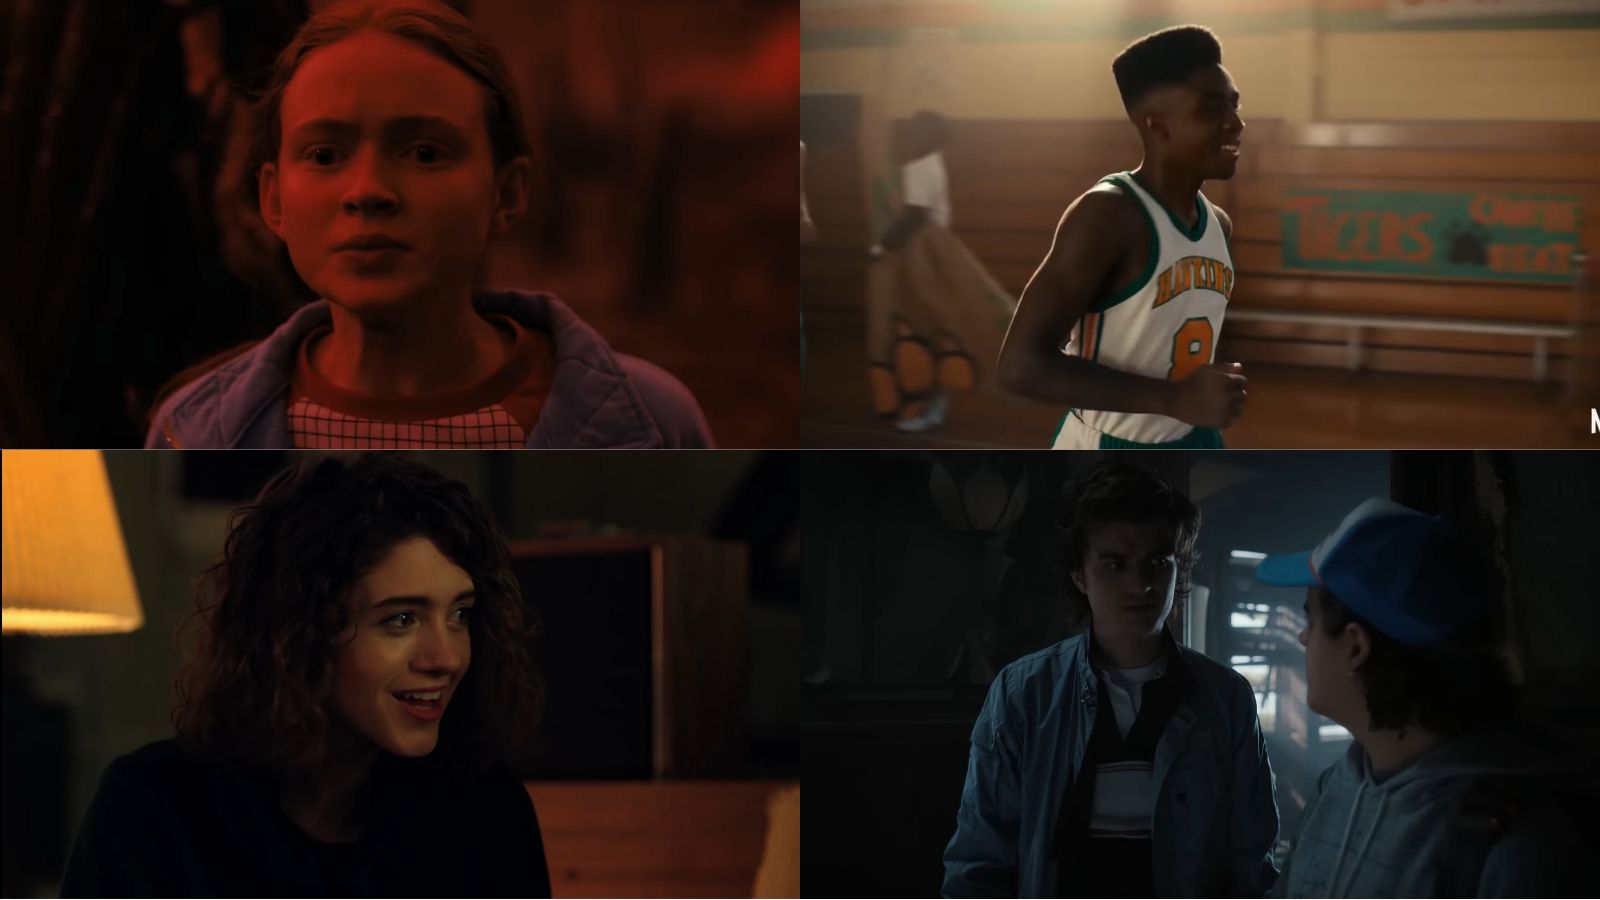 5 Characters That Could Die in Stranger Things 4